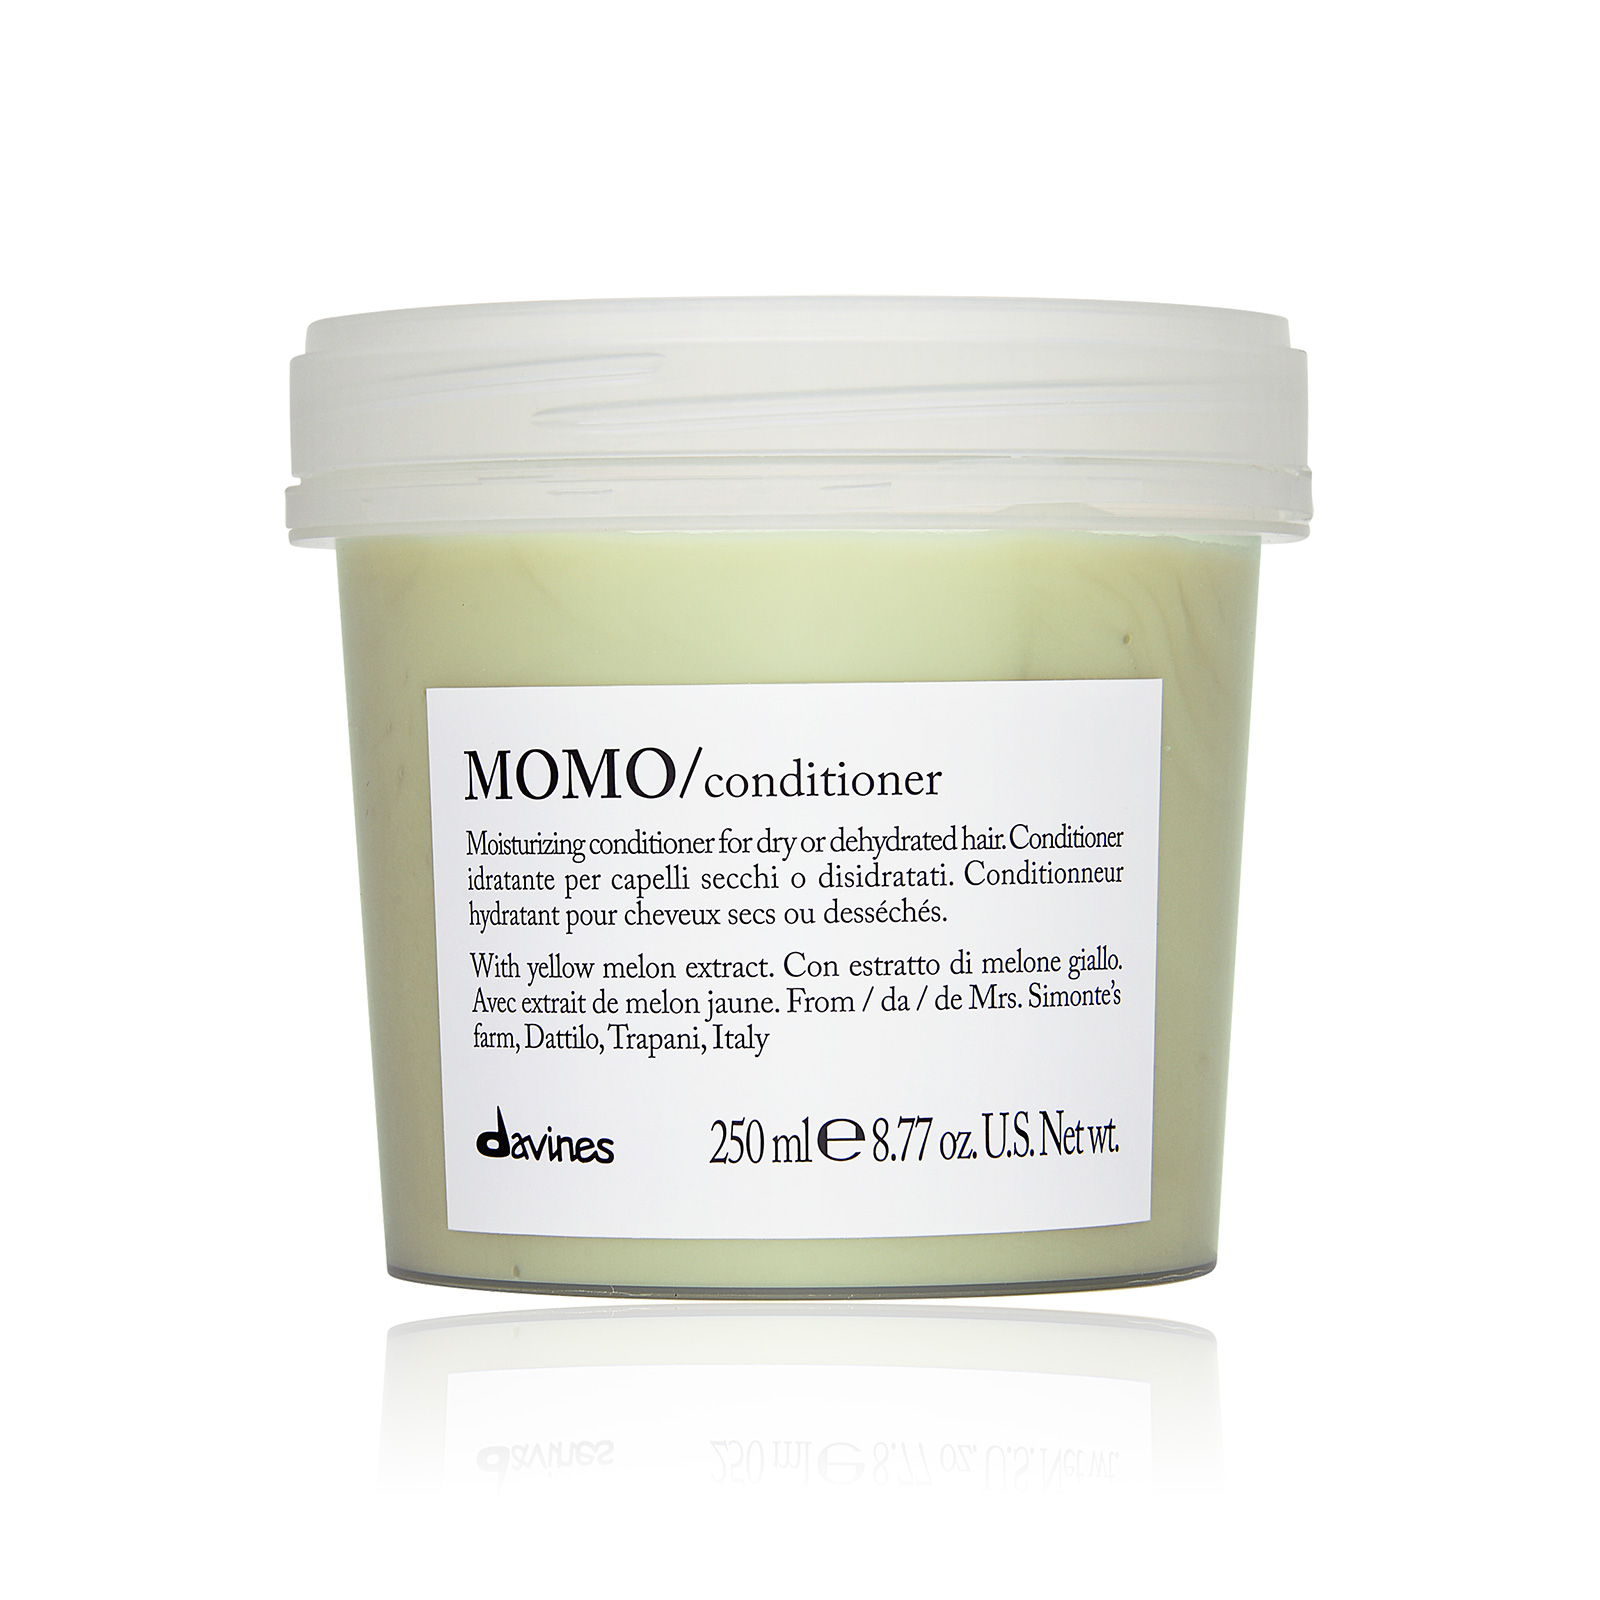 Momo Conditioner (for Dry or Dehydrated Hair)